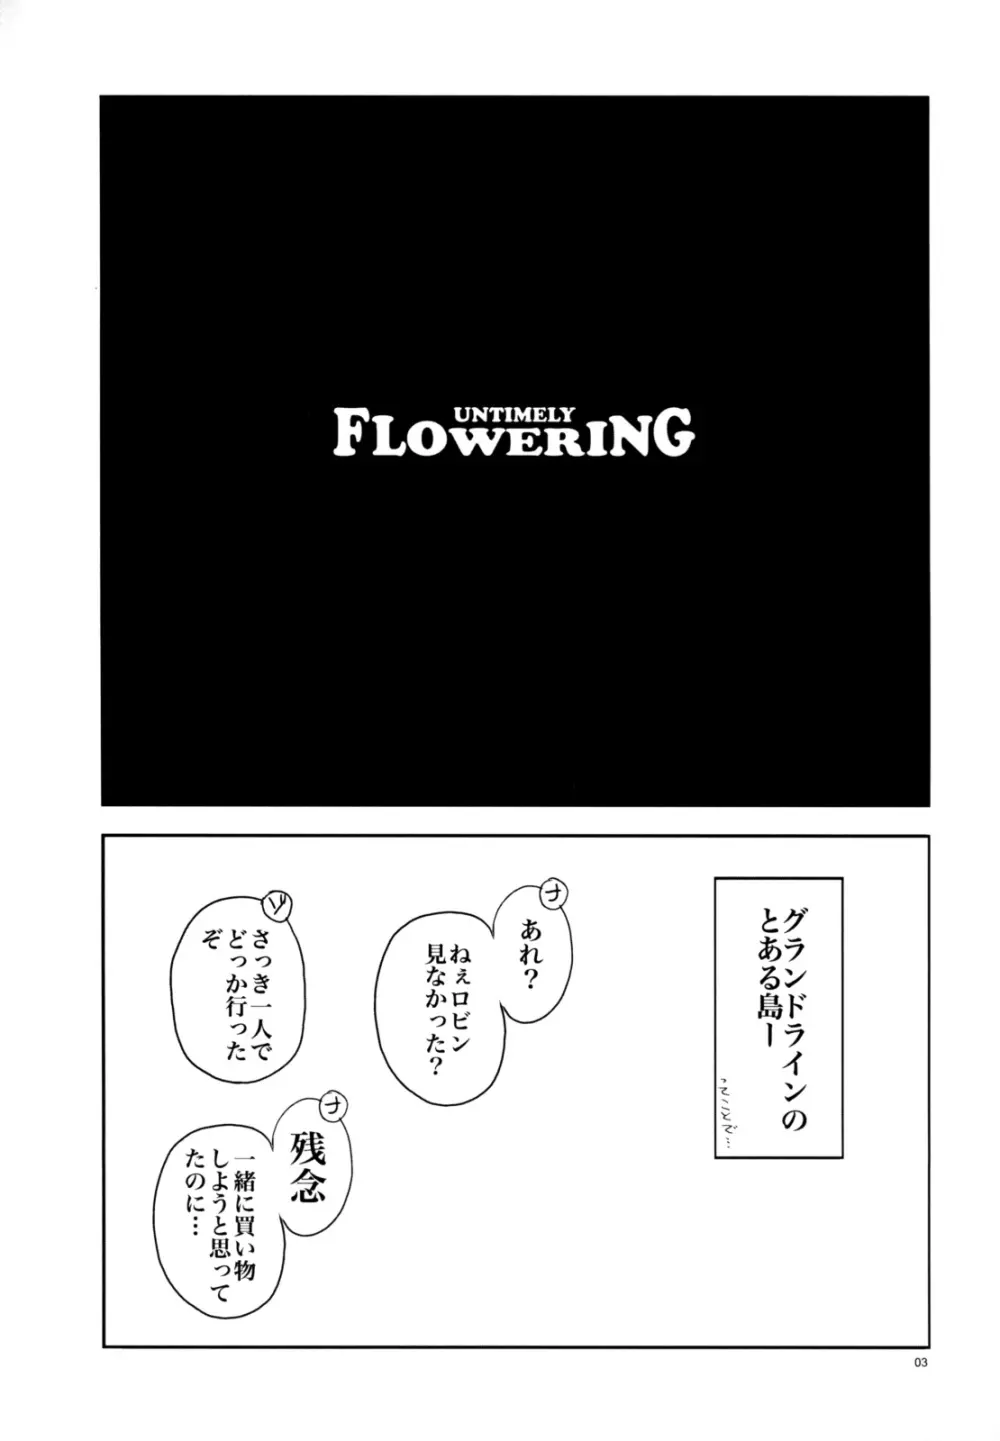 UNTIMELY FLOWERING 2ページ